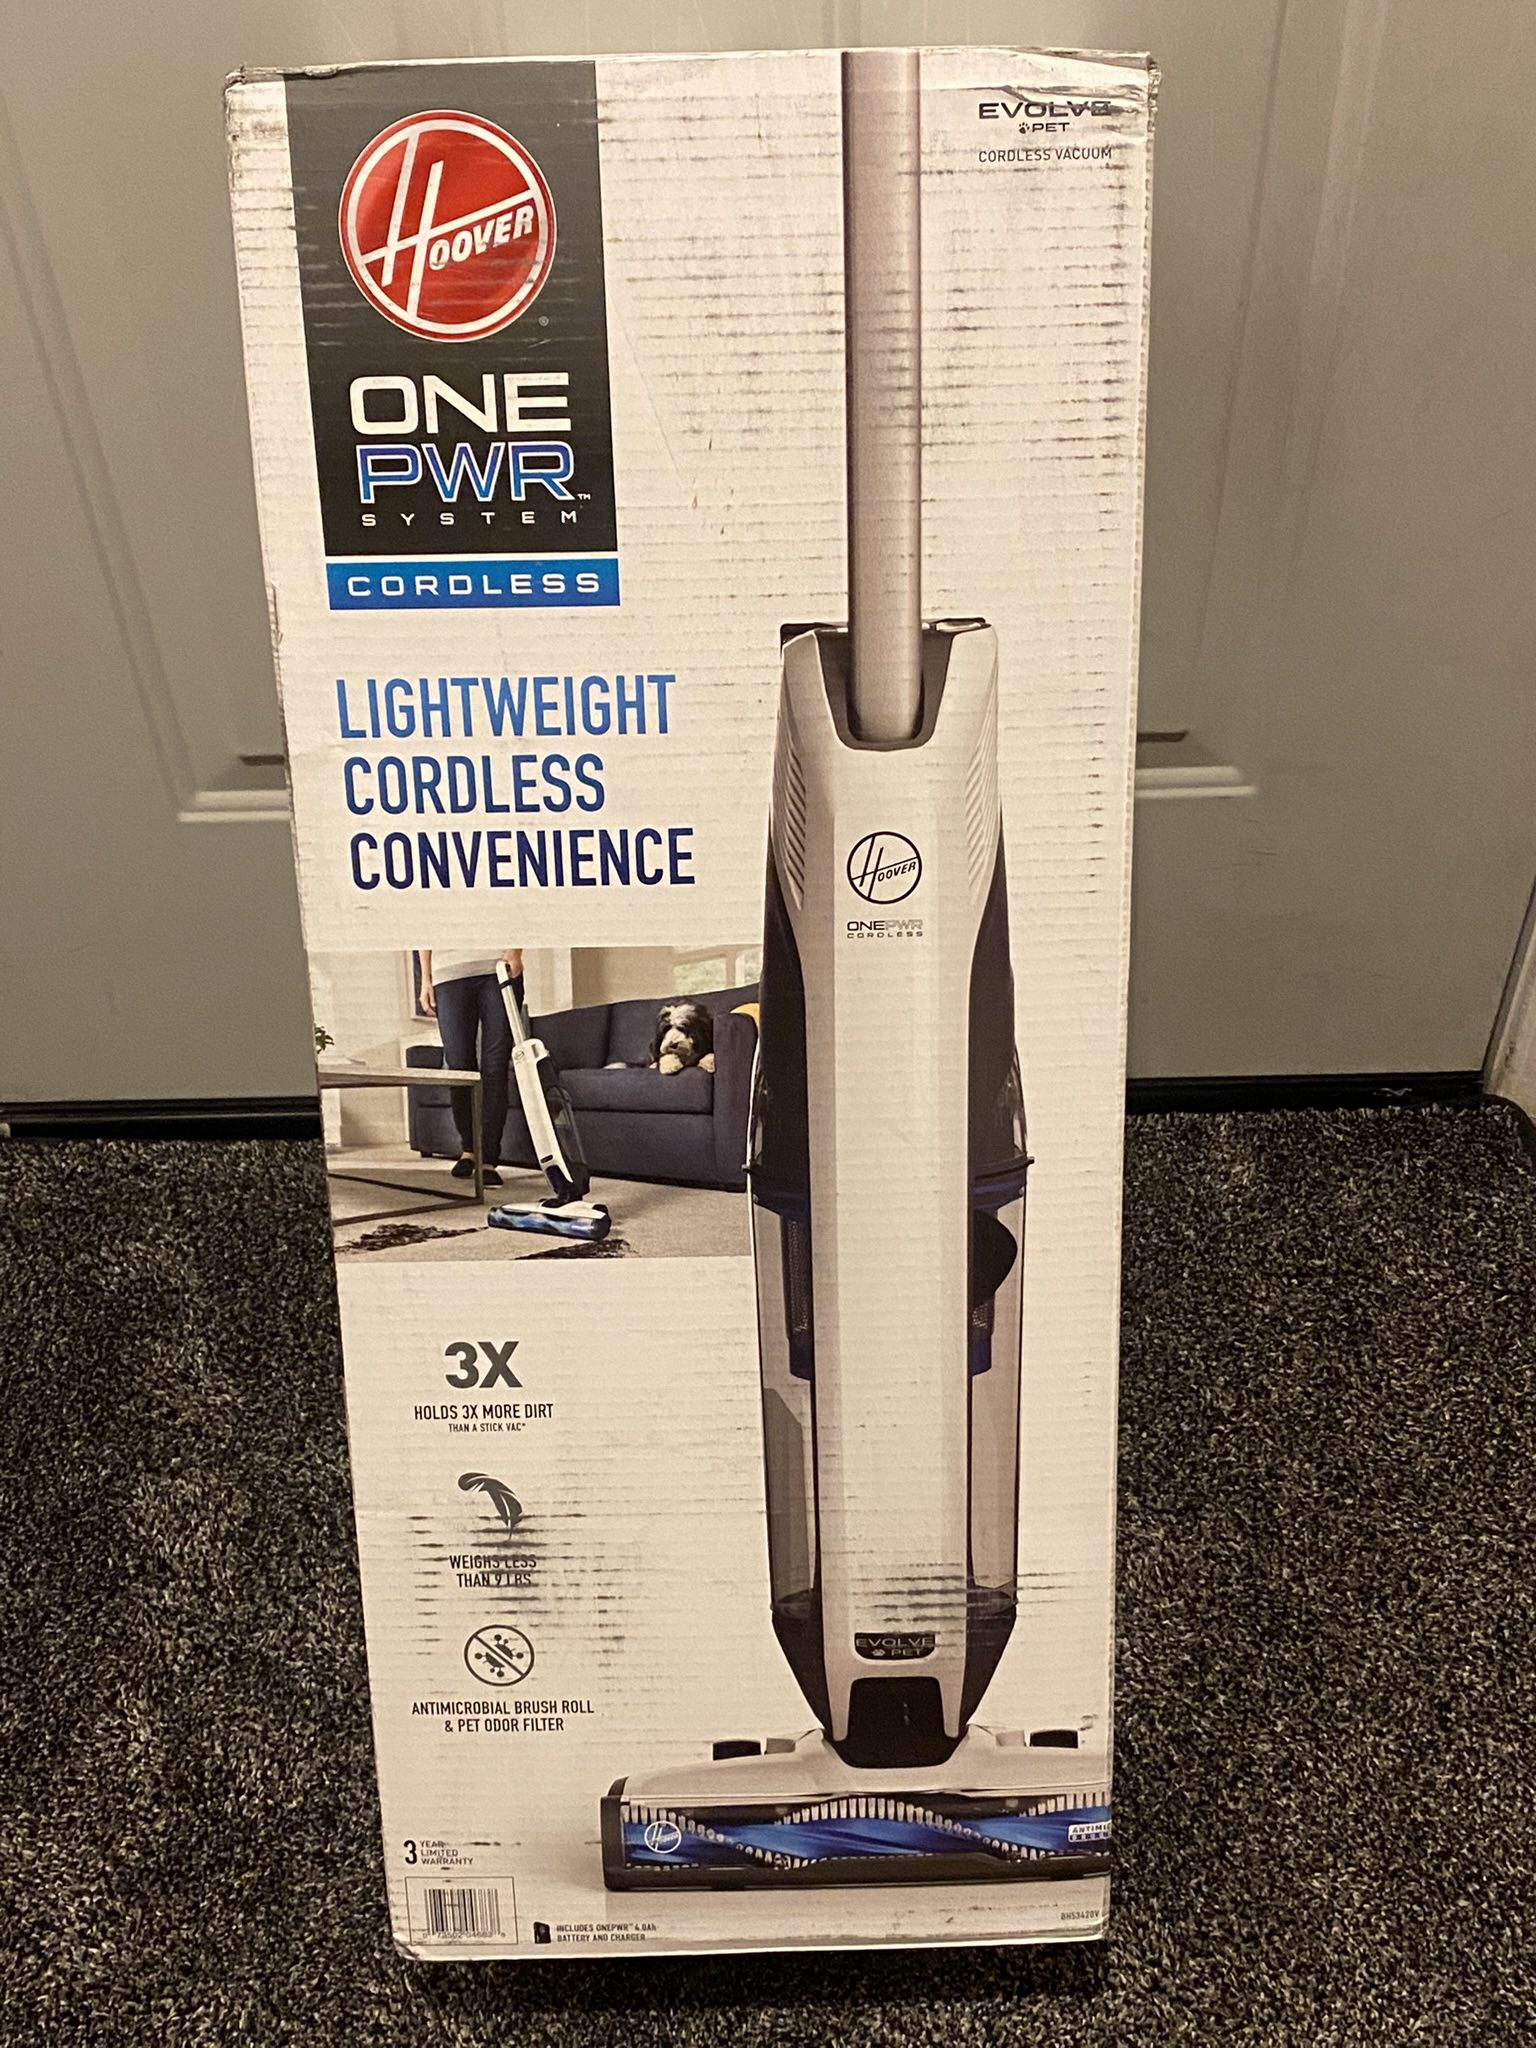 New In Box! Hoover onepwr cordless pet vacuum. Light weight! 